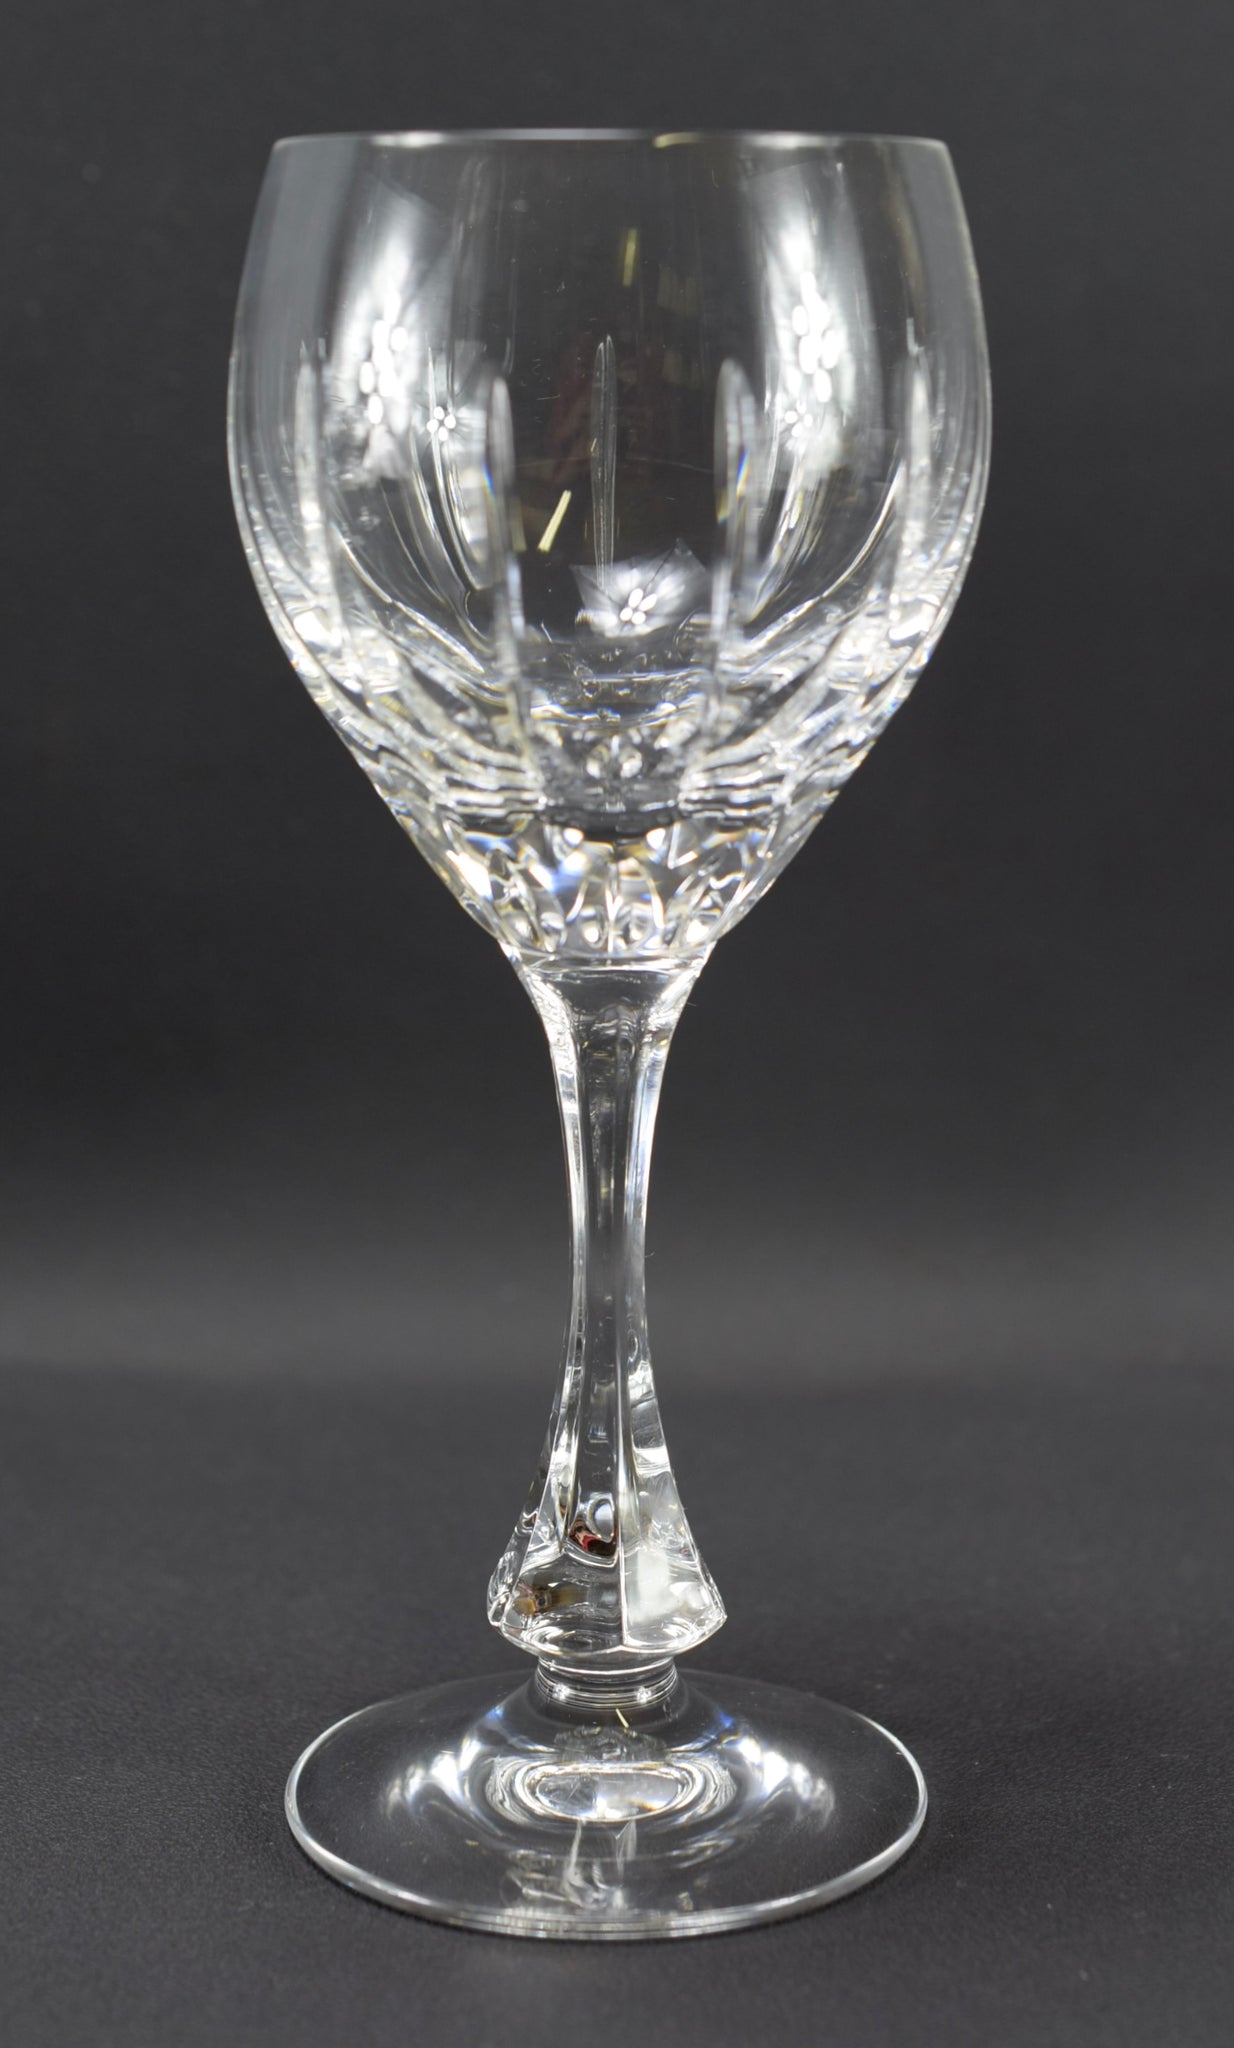 BACCARAT CRYSTAL CUT TO CLEAR WINE GLASSES VERY RARE ANTIQUE 110YrsOld  FRANCE